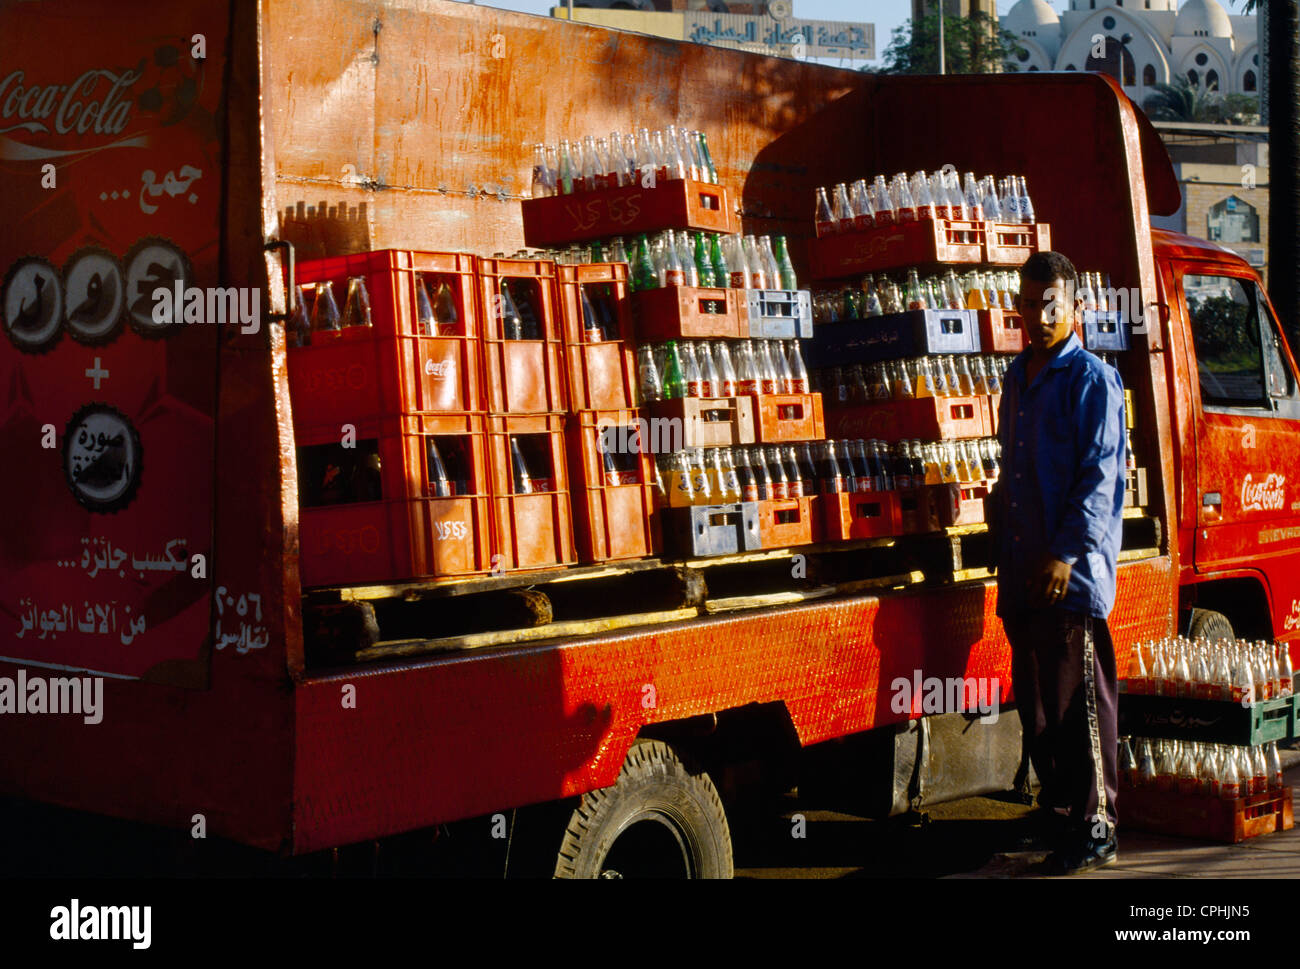 Aswan Egypt Coca Cola Delivery Van Man Delivering Drinks And Collecting Empty Bottles Stock Photo